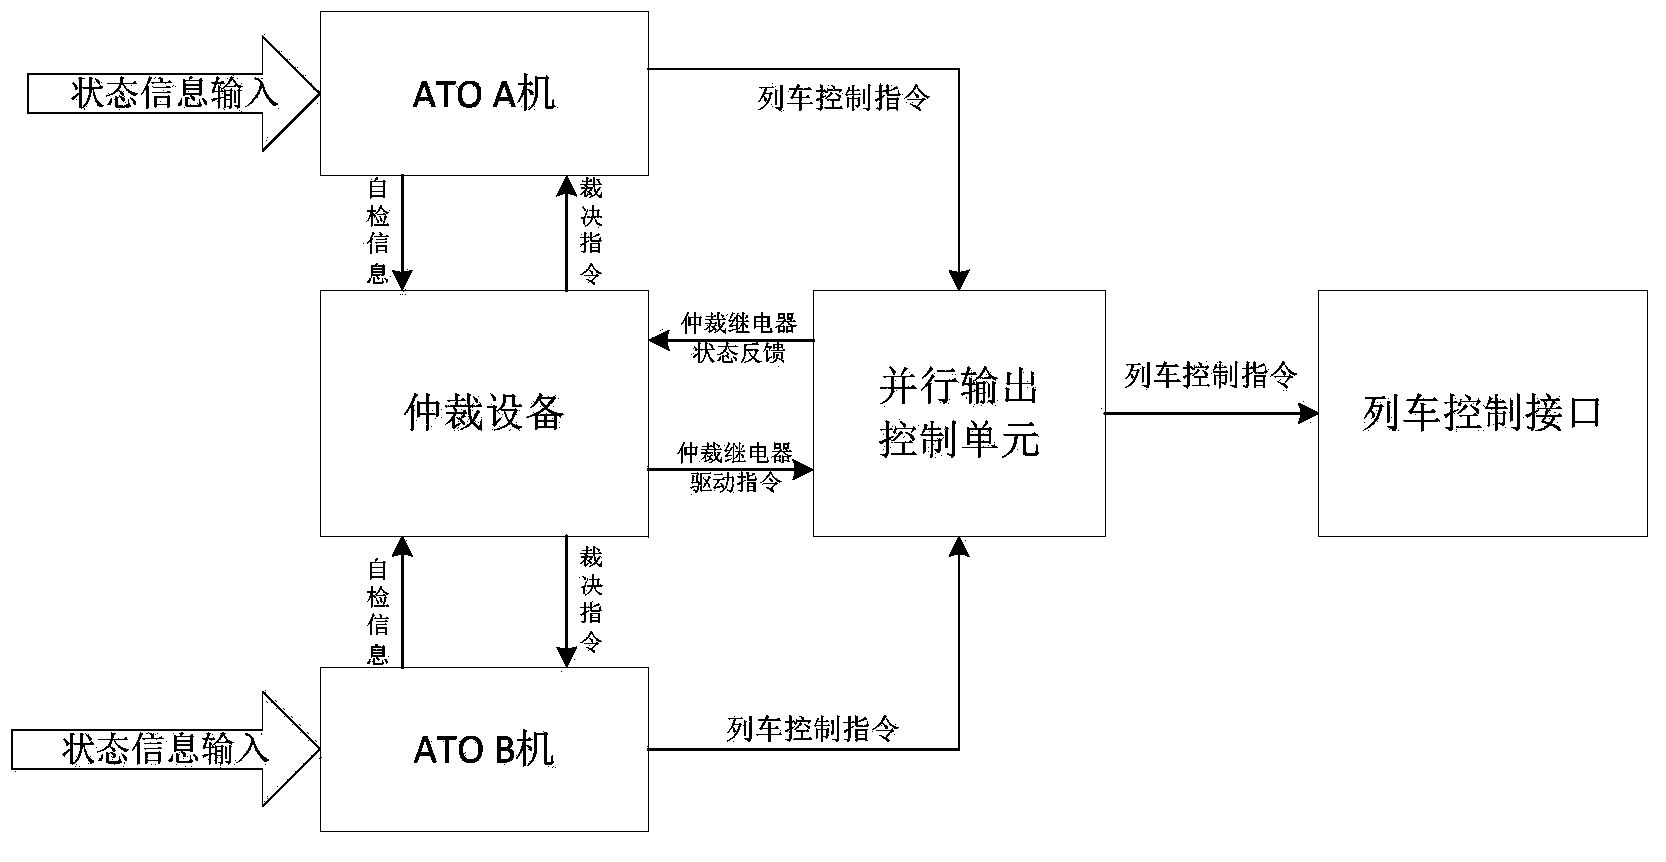 Dual-machine hot standby train automatic operation (ATO) system